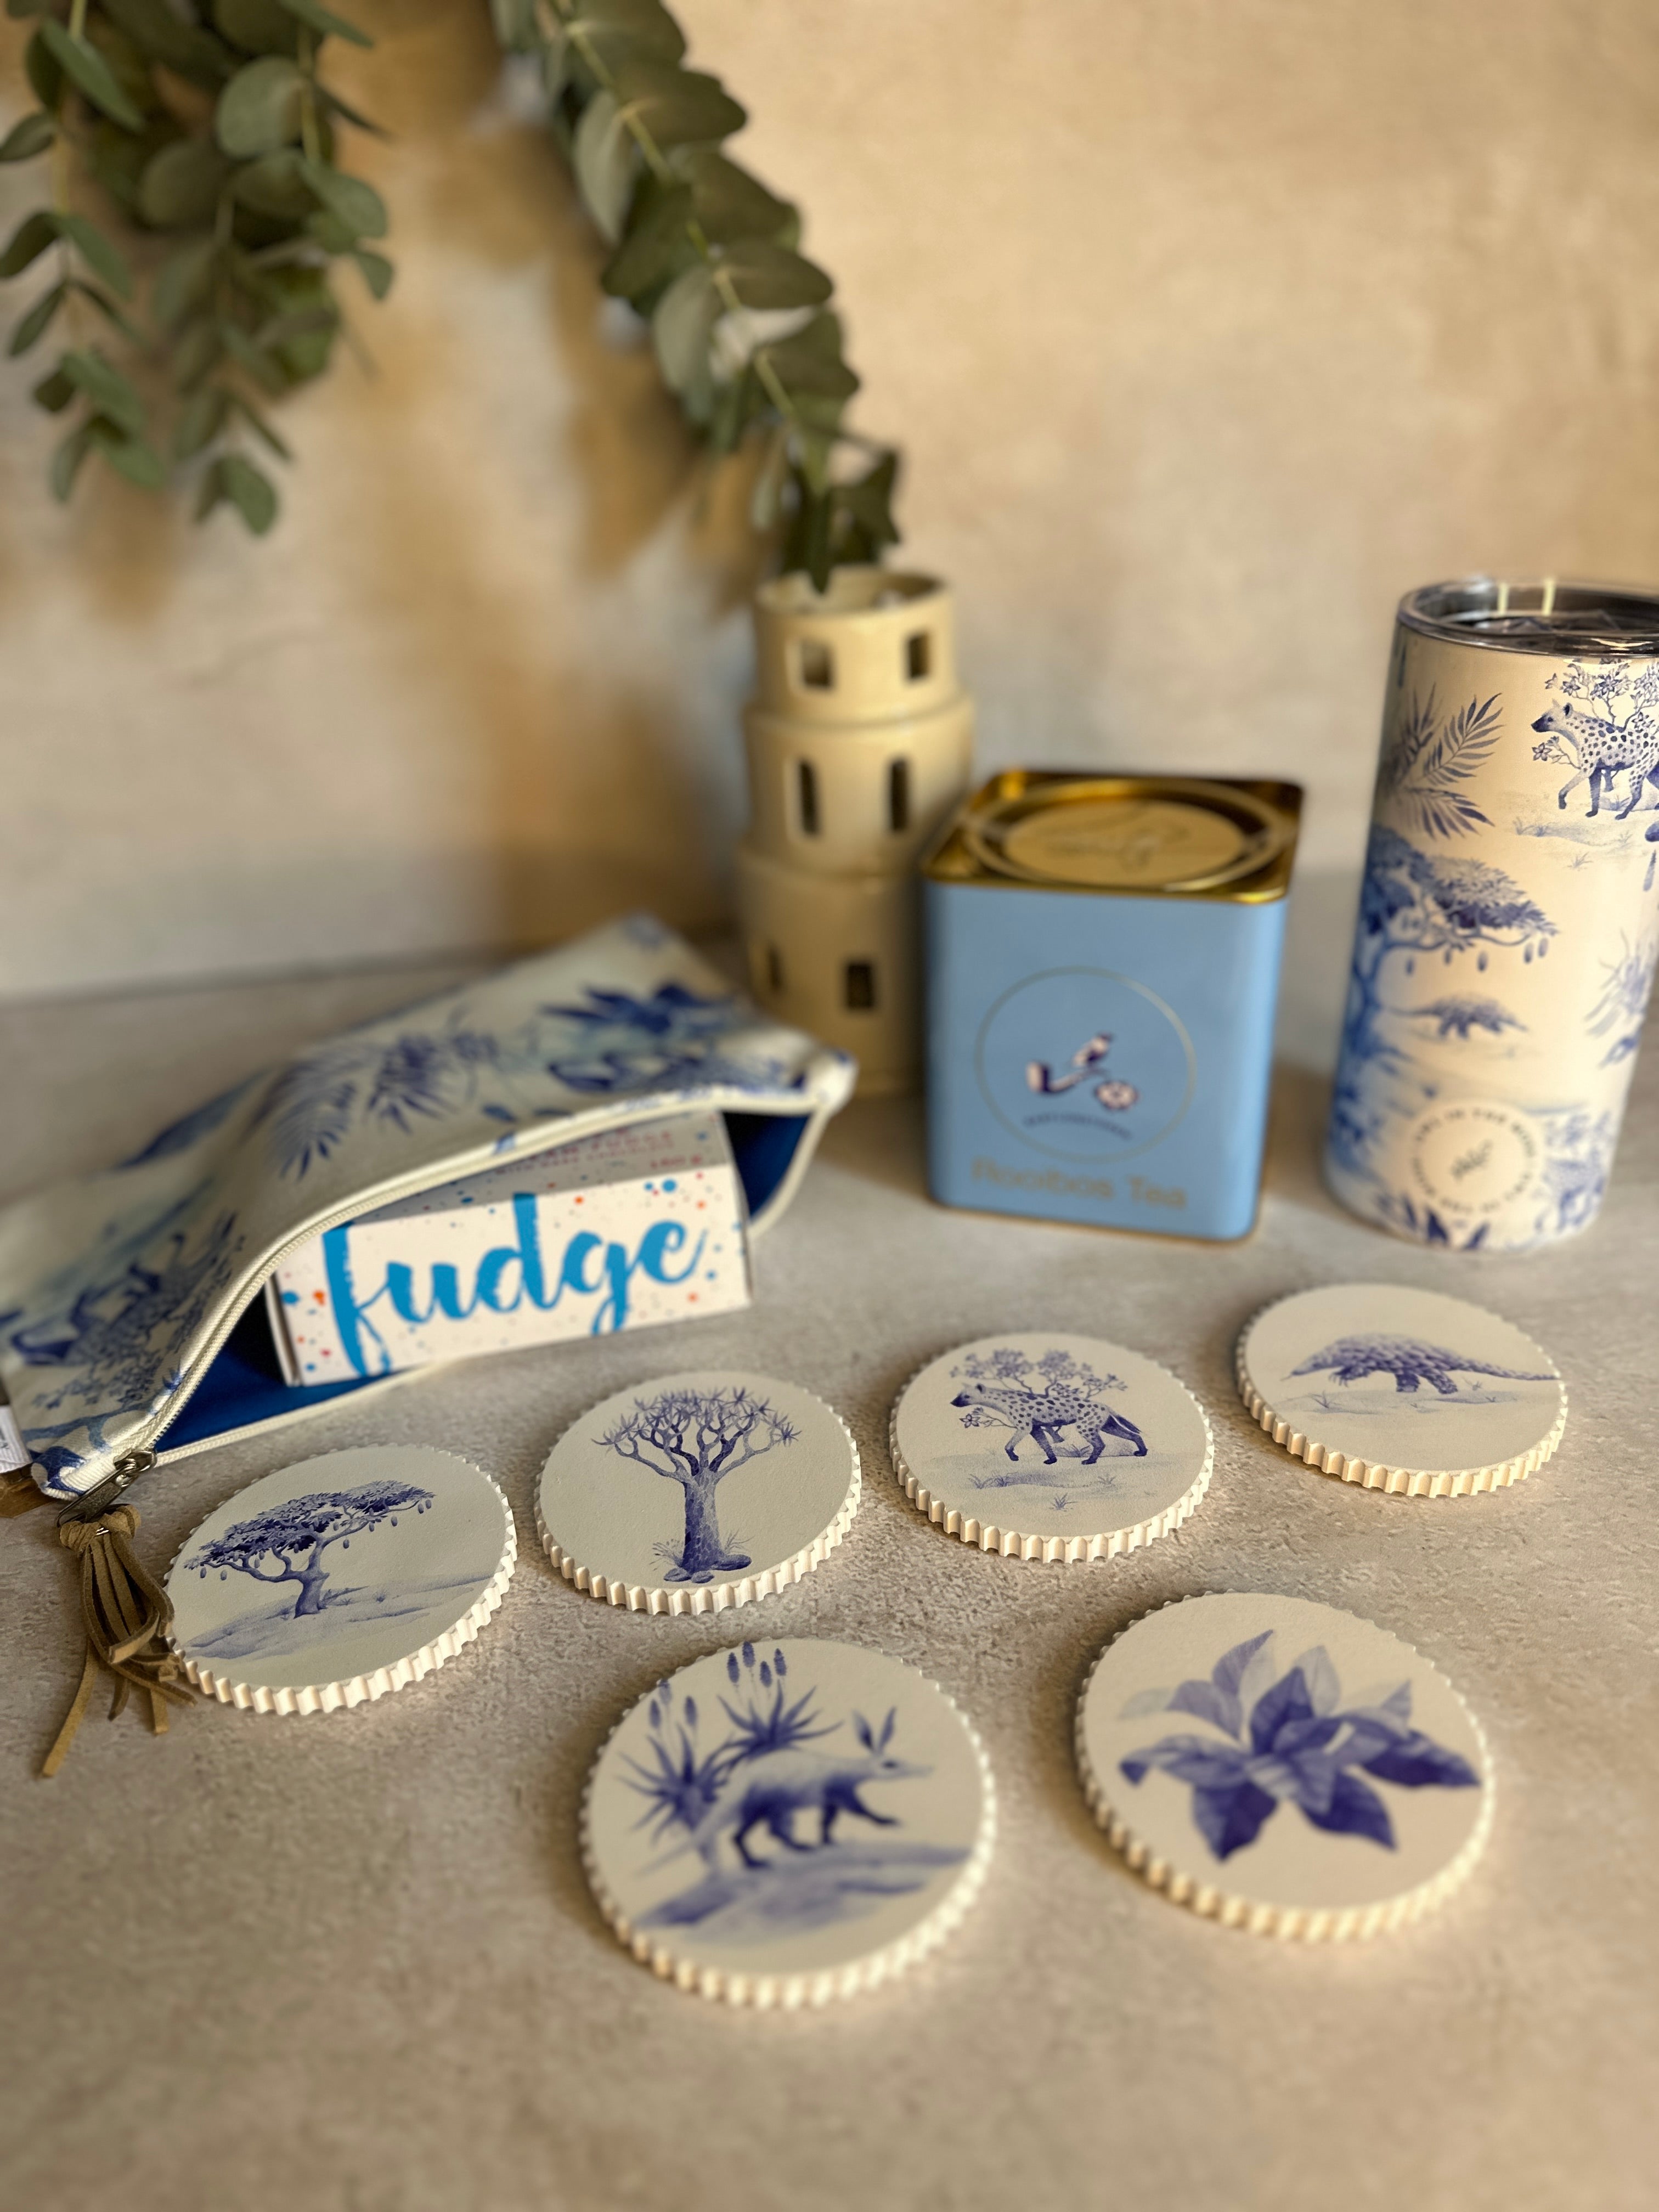 bee festive gift south africa owl in the moss babylonstoren the counter fudge travel house warming gift